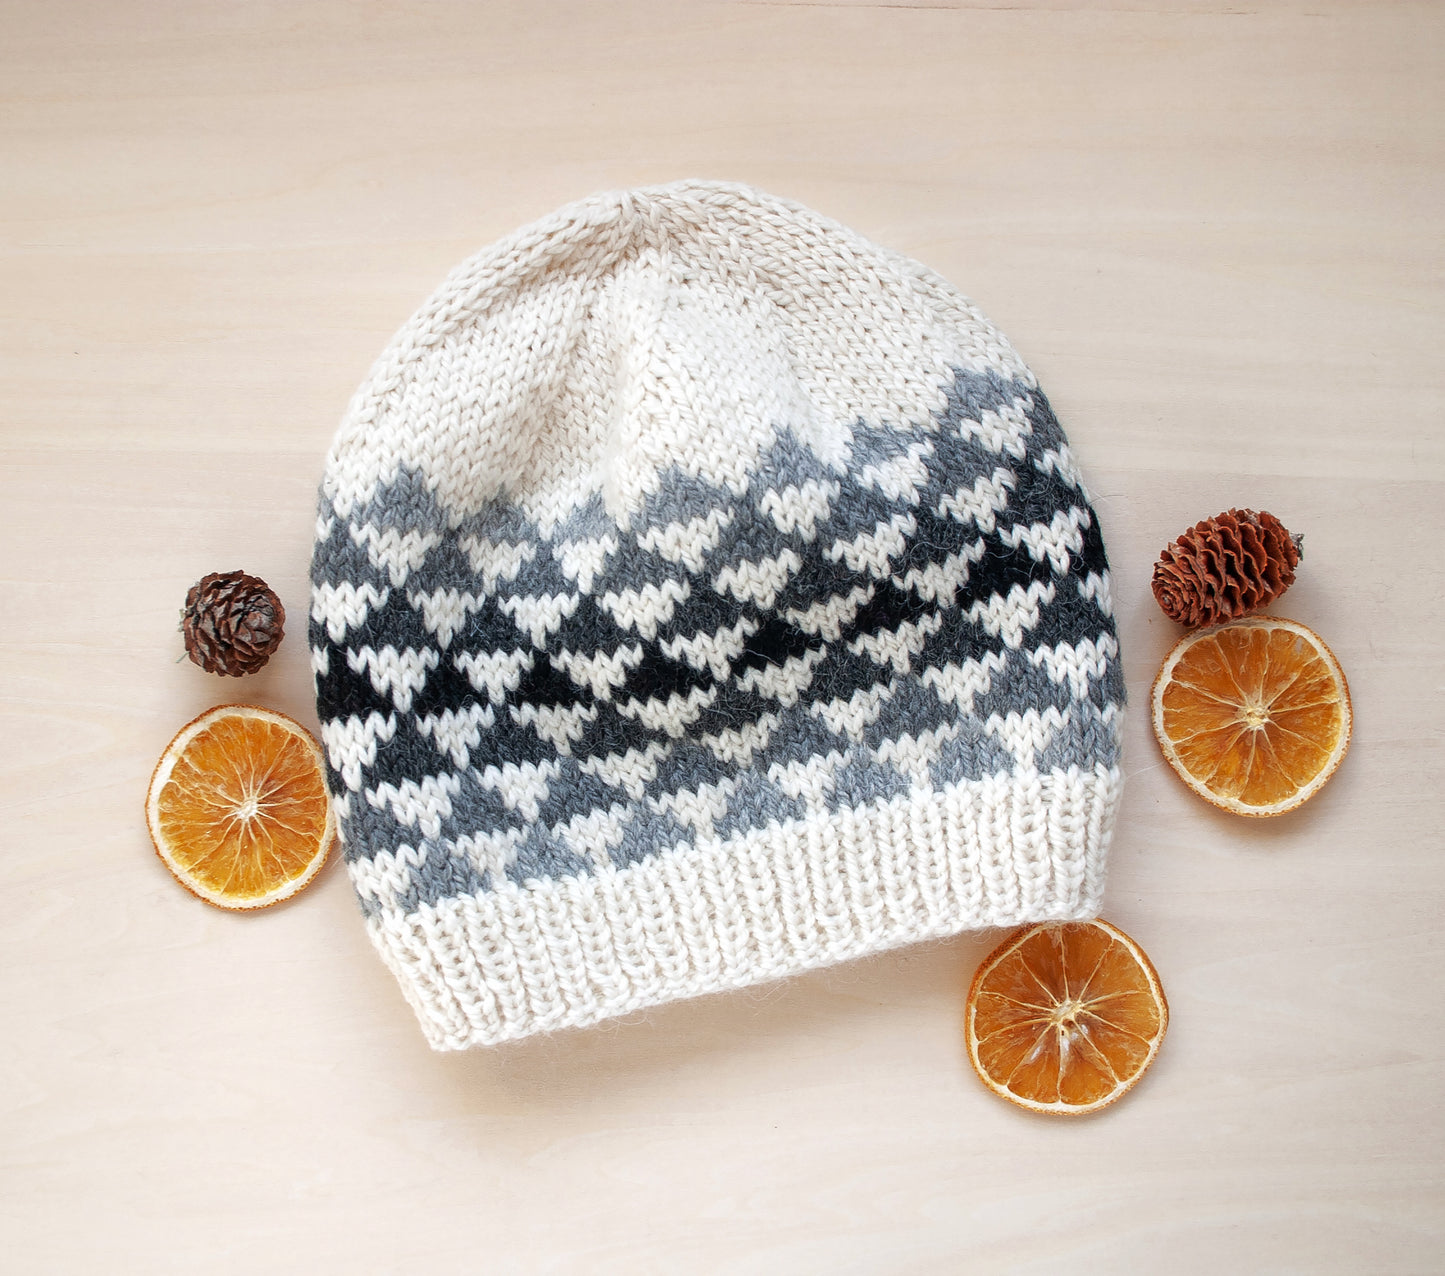 white, grey and black wool hand-knitted Fair Isle beanie hat in triangles knitting pattern